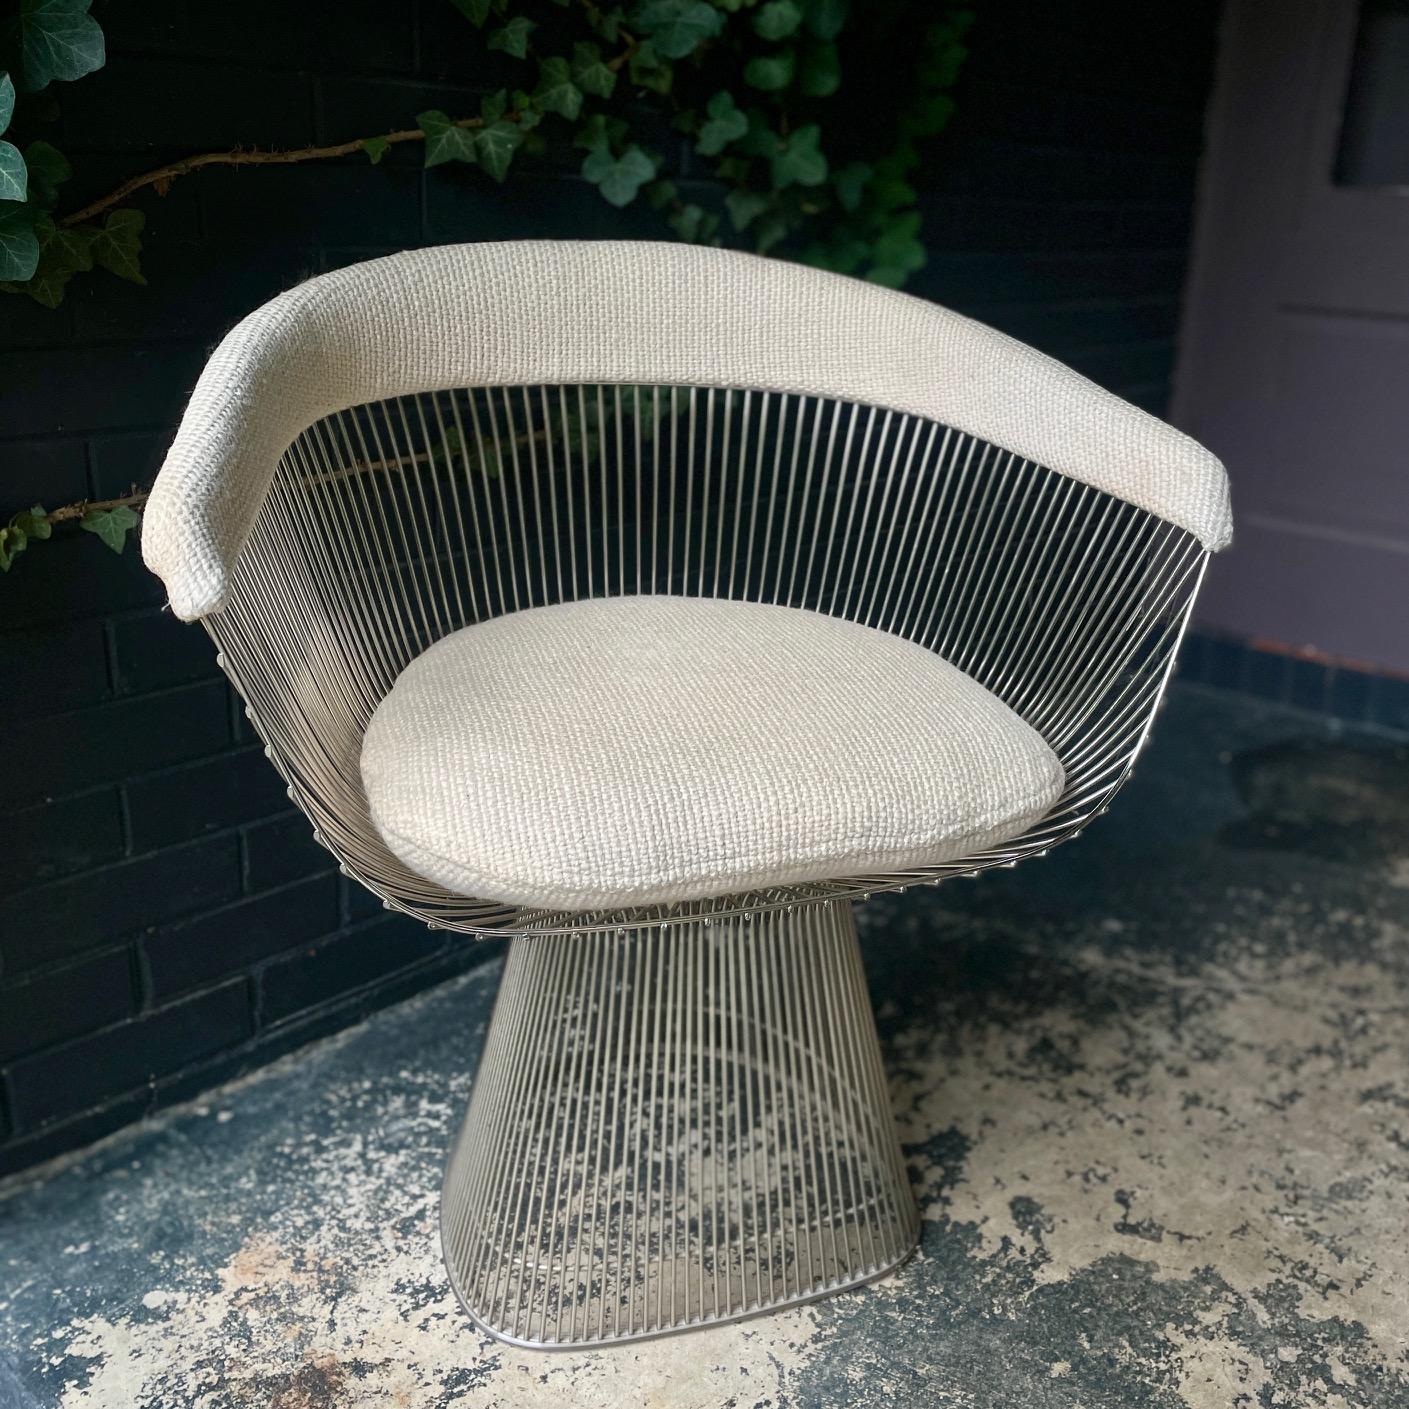 The perfect glamorous vanity chair.  Very sculptural wire armchair designed by Warren Platner and produced by Knoll in the 1970s.  Dingy original woven knoll knobby wool blend biege fabric. Fair vintage condition.

W 27.5 x D 20.5 x H 29.25 in.
Seat